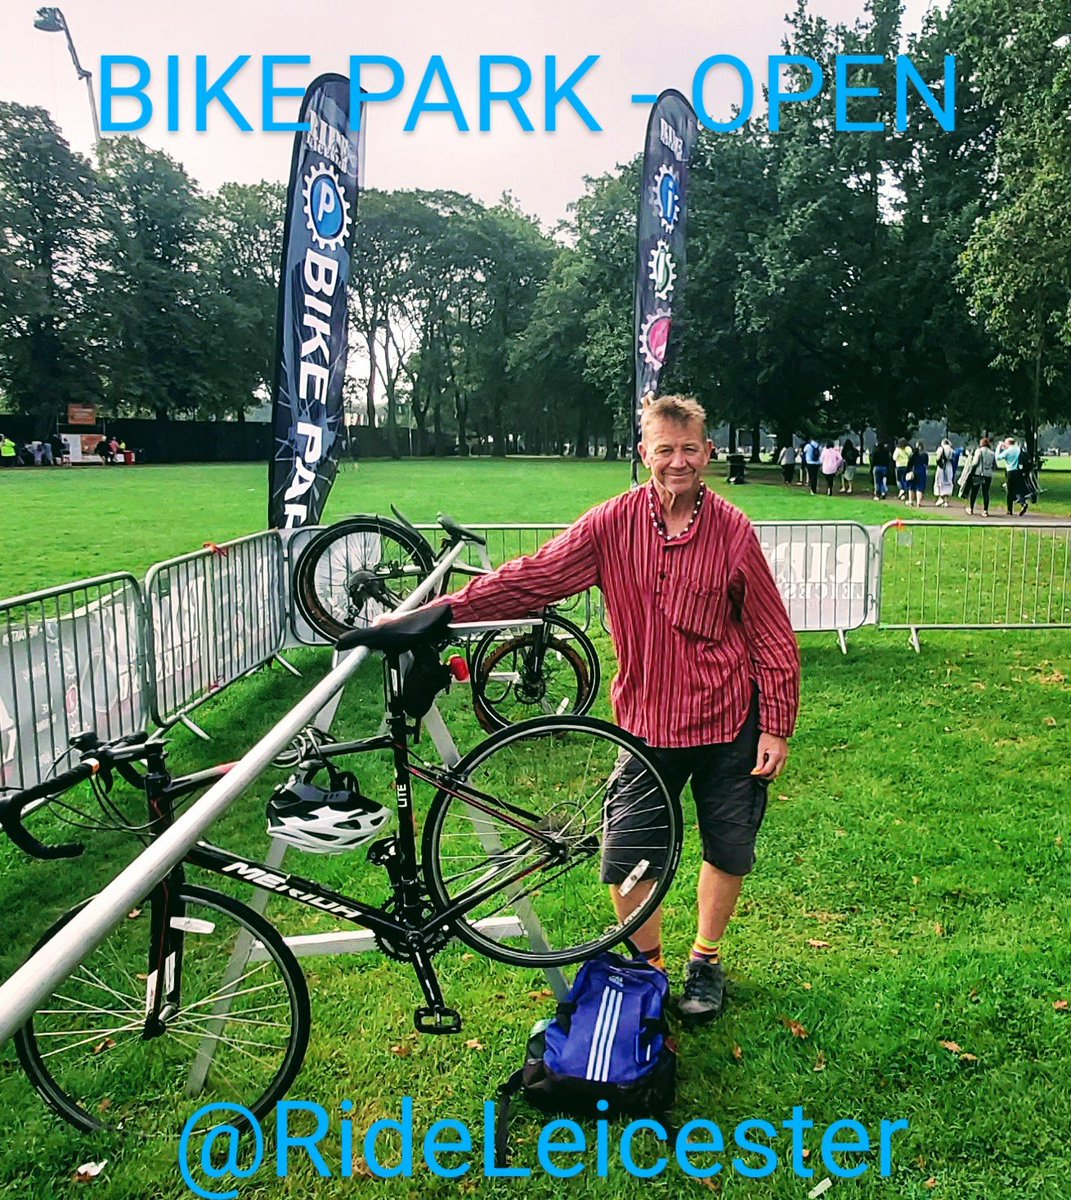 Bike Park at BBC2 In The Park is OPEN - One of the first customers says; 'The ride up London Rd from the station was great - Cycle tracks all the way' ! @visit_leicester @CHYMLeics @ActiveLeicester @OweniteAdam @Leicester_News @janet_rideleics @leicesterfest